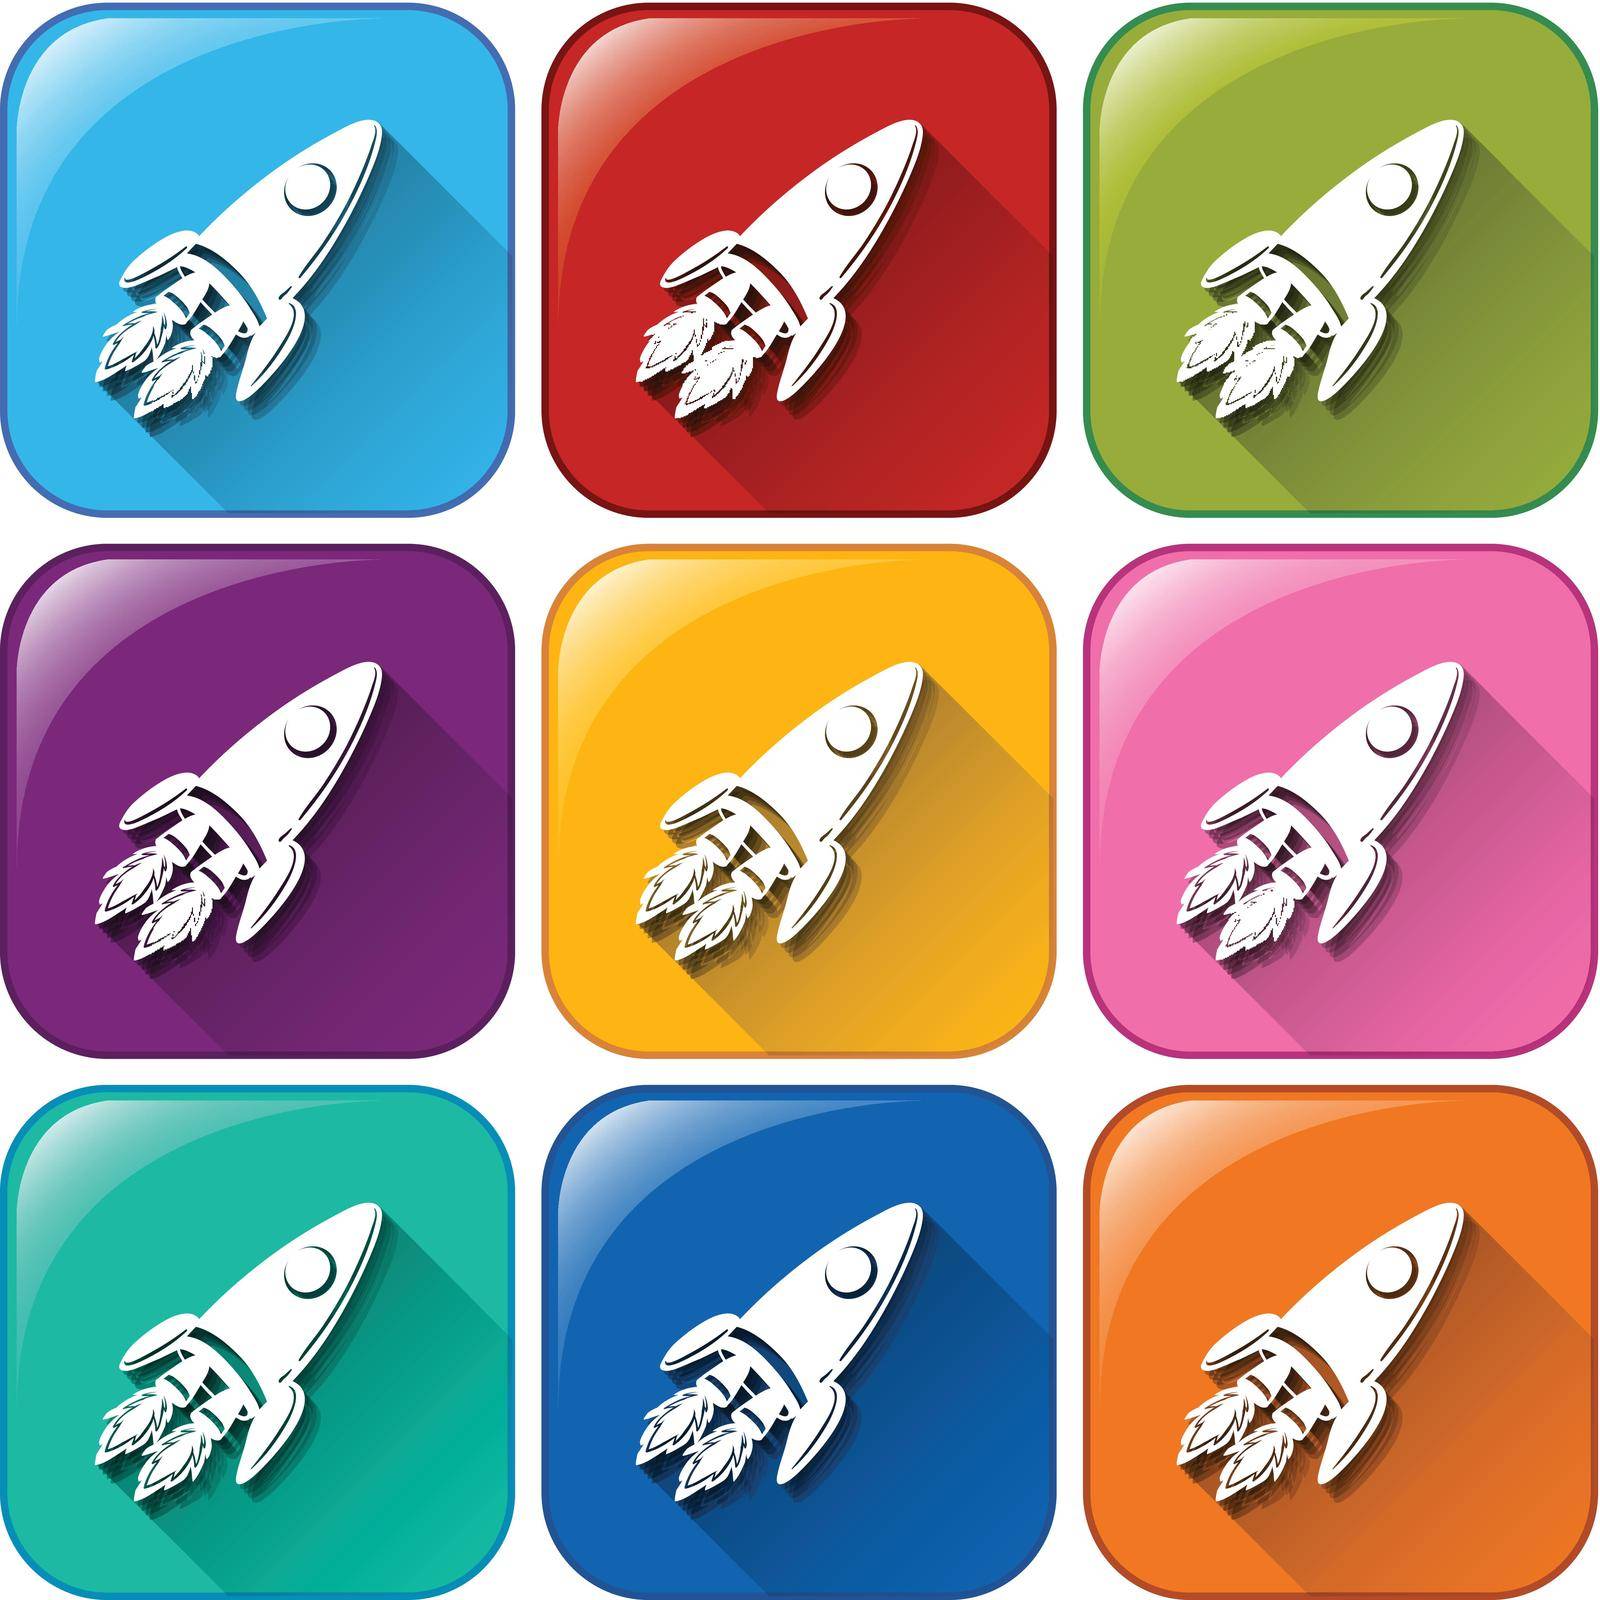 Illustration of the icons with rockets on a white background